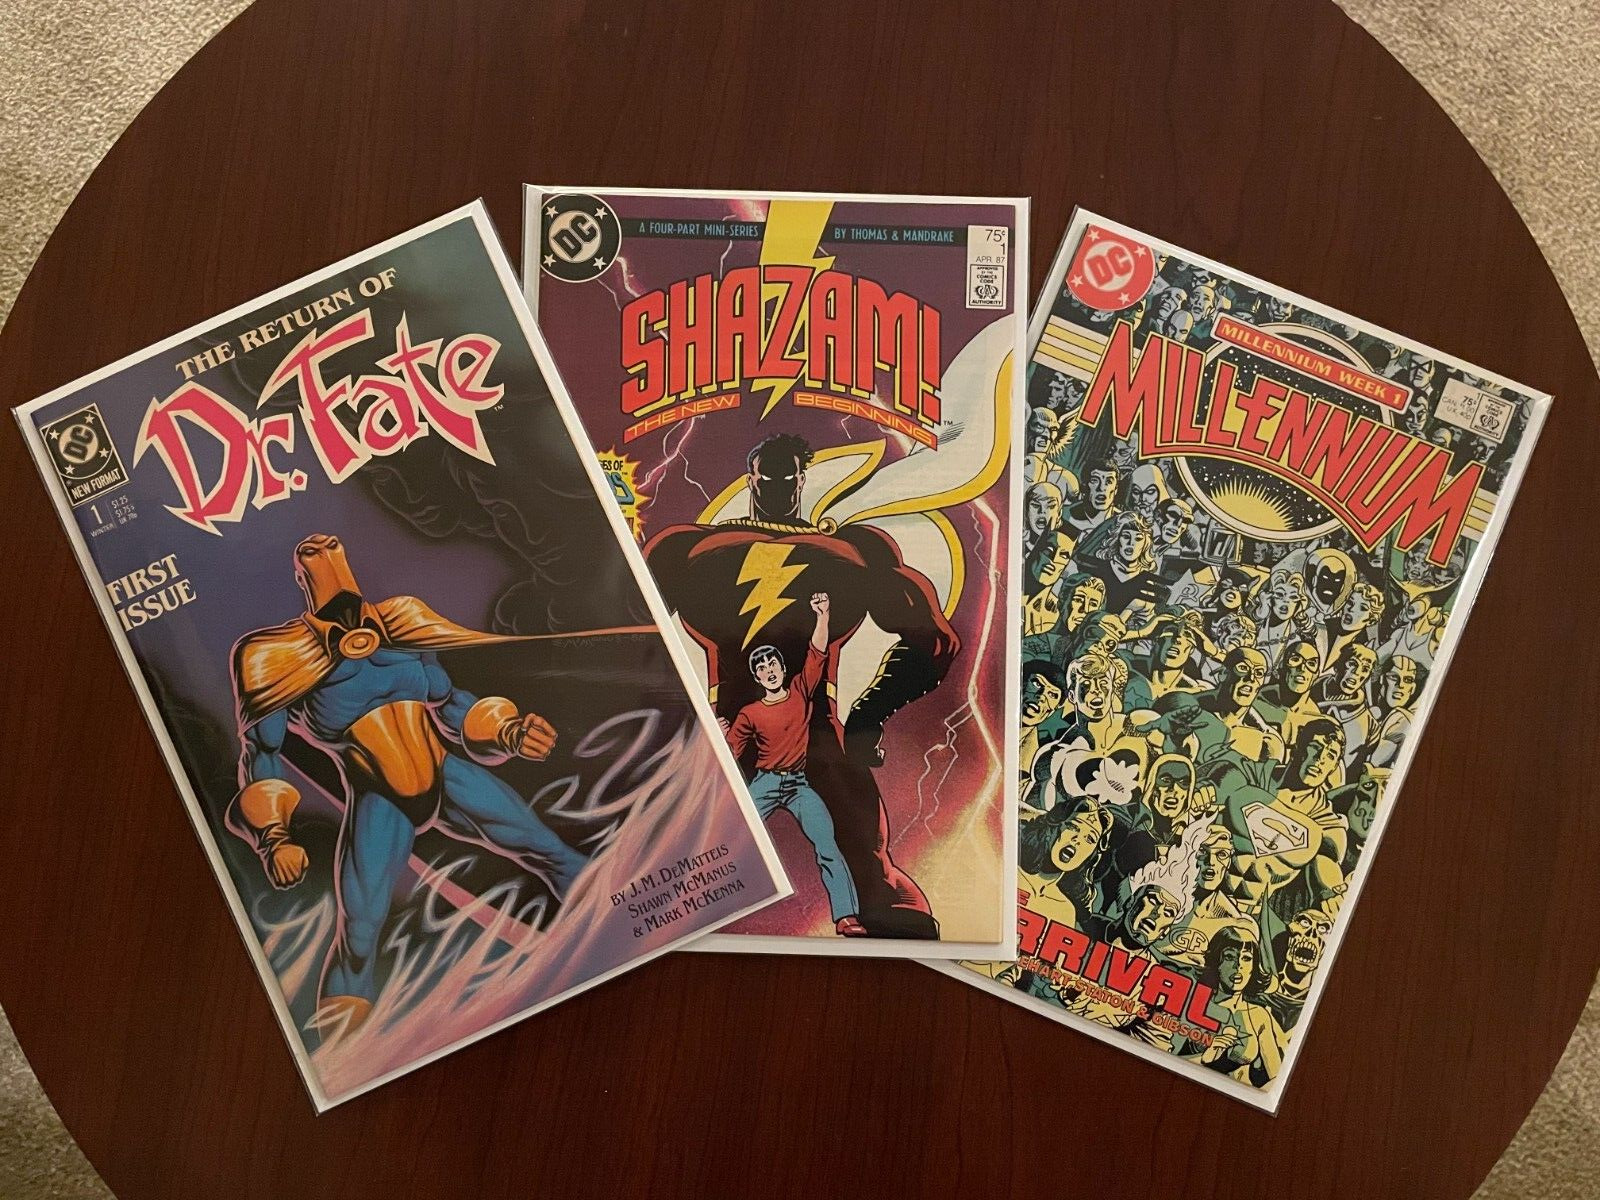 (Lot of 3 First Issues) Dr. Fate #1 (1988) Shazam #1 (1987) Millennium #1 (1988)